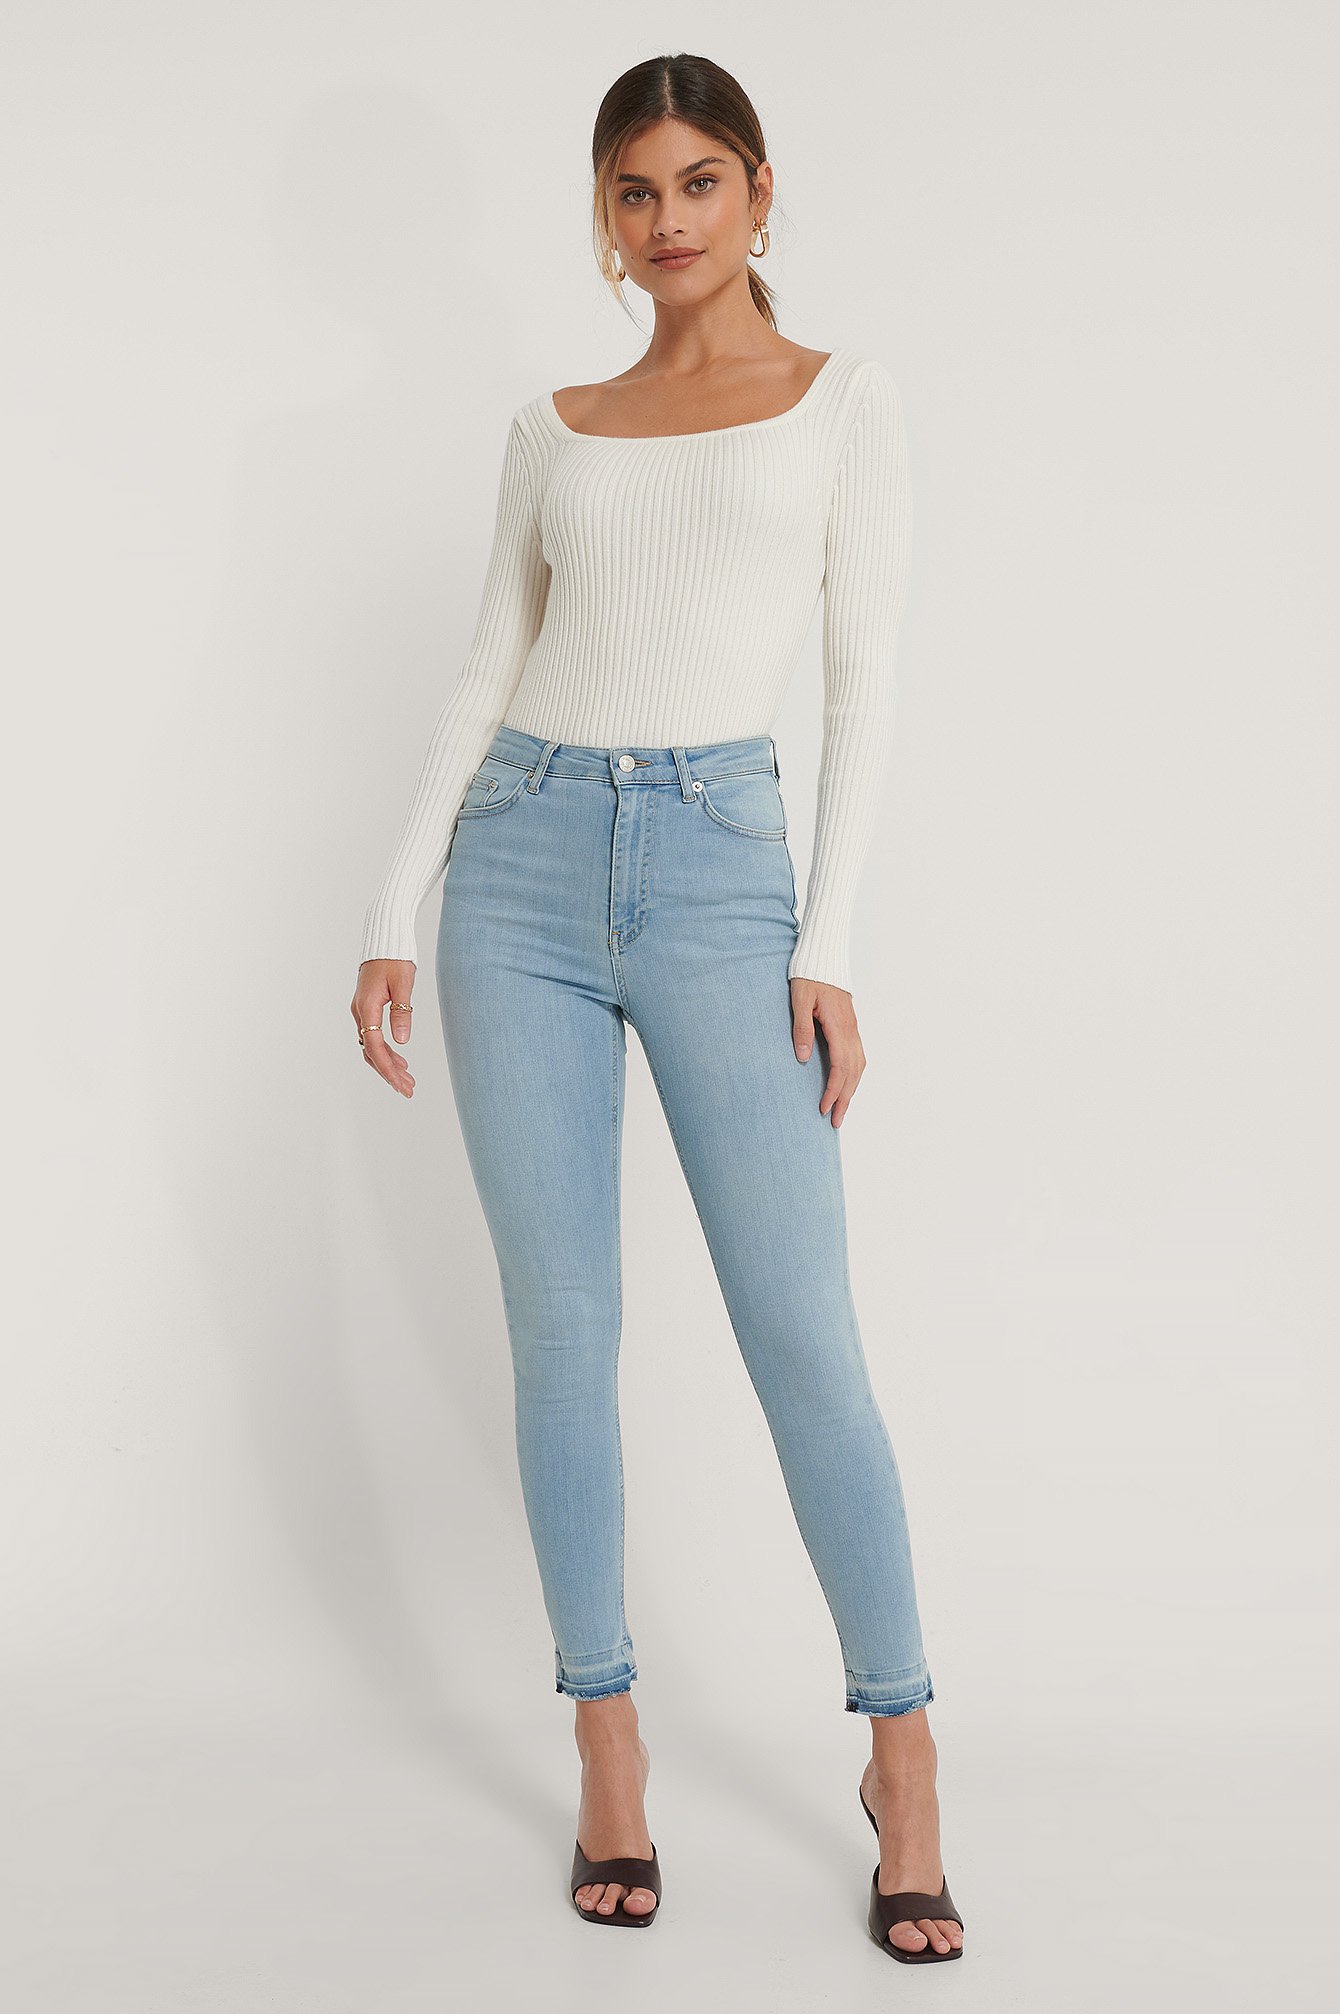 Skinny High Waist Open Hem Jeans Outfit.